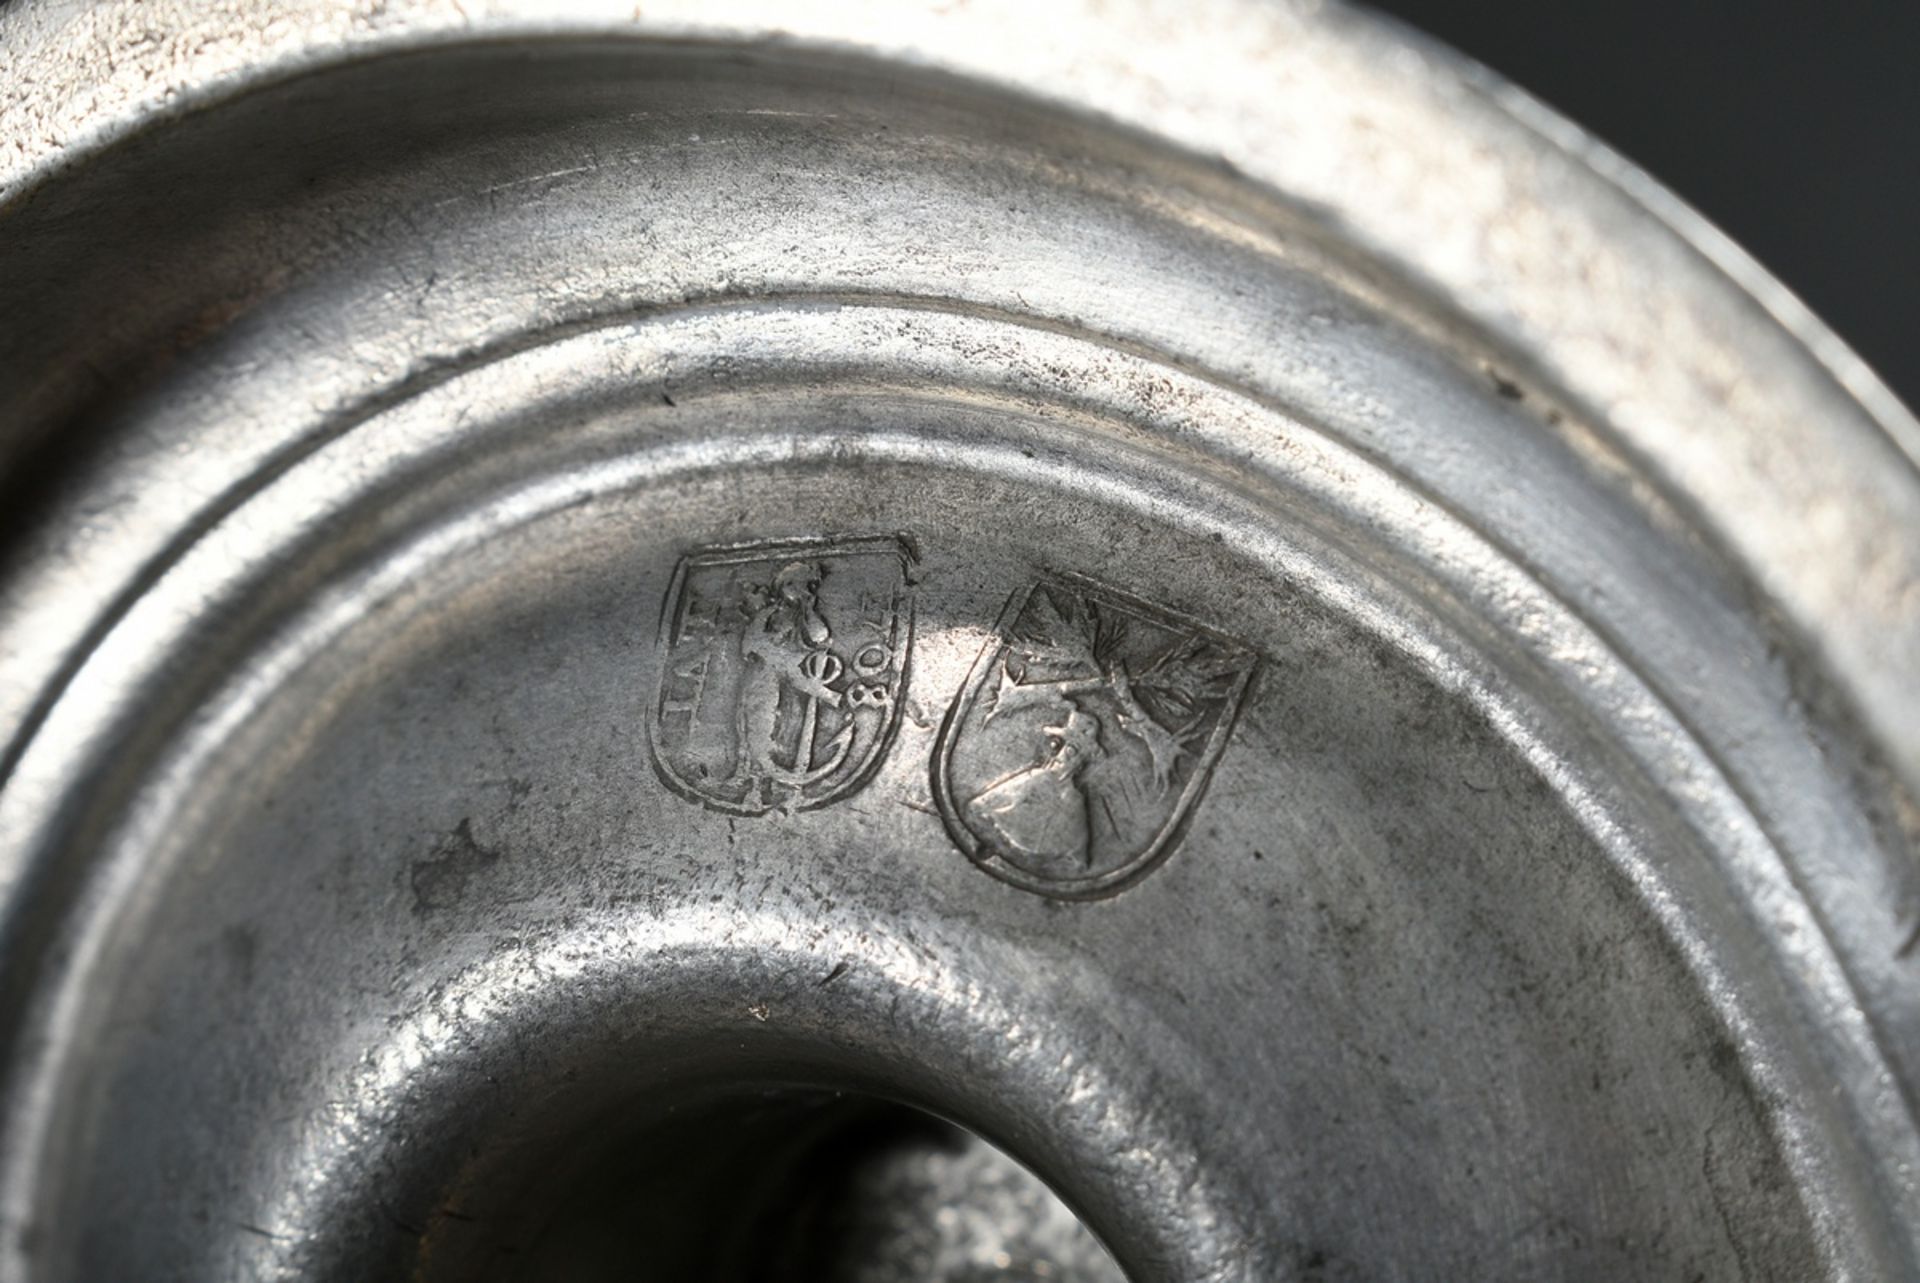 3 Various pieces of pewter, 18th century: large plate with engraved owner's monogram "C.S.S. 1775", - Image 7 of 11